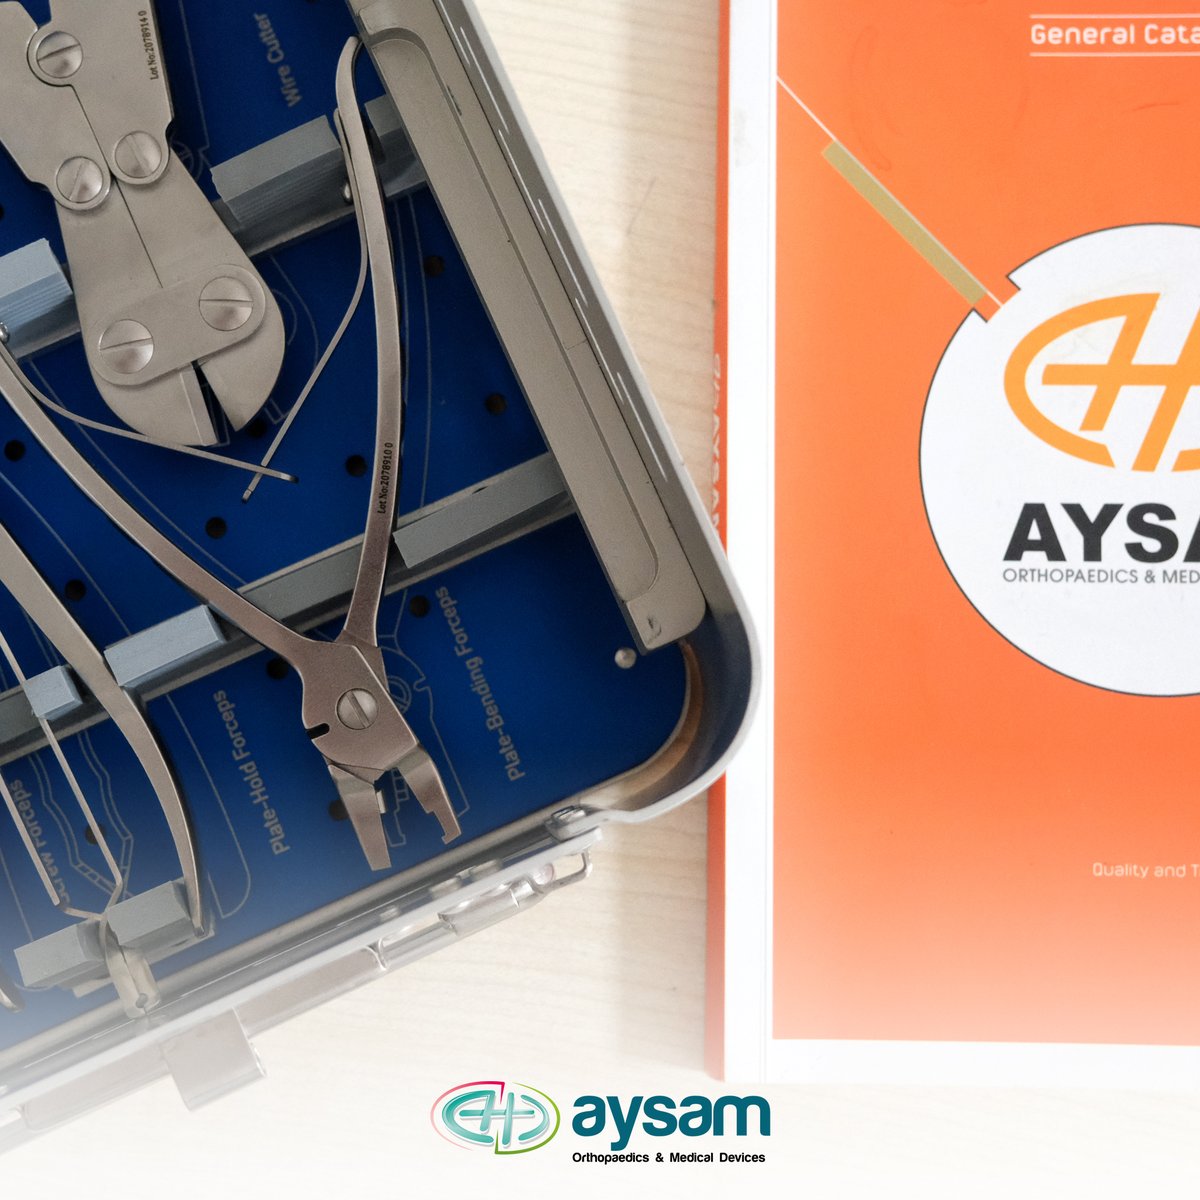 As Aysam, we work with a strong team spirit in our R&D center, in line with our vision of providing innovative and quality solutions in the healthcare sector.

aysam.com.tr

#Aysam #AysamOrthopaedics #medical #medicalproducts #medicaldevices #surgicalequipment